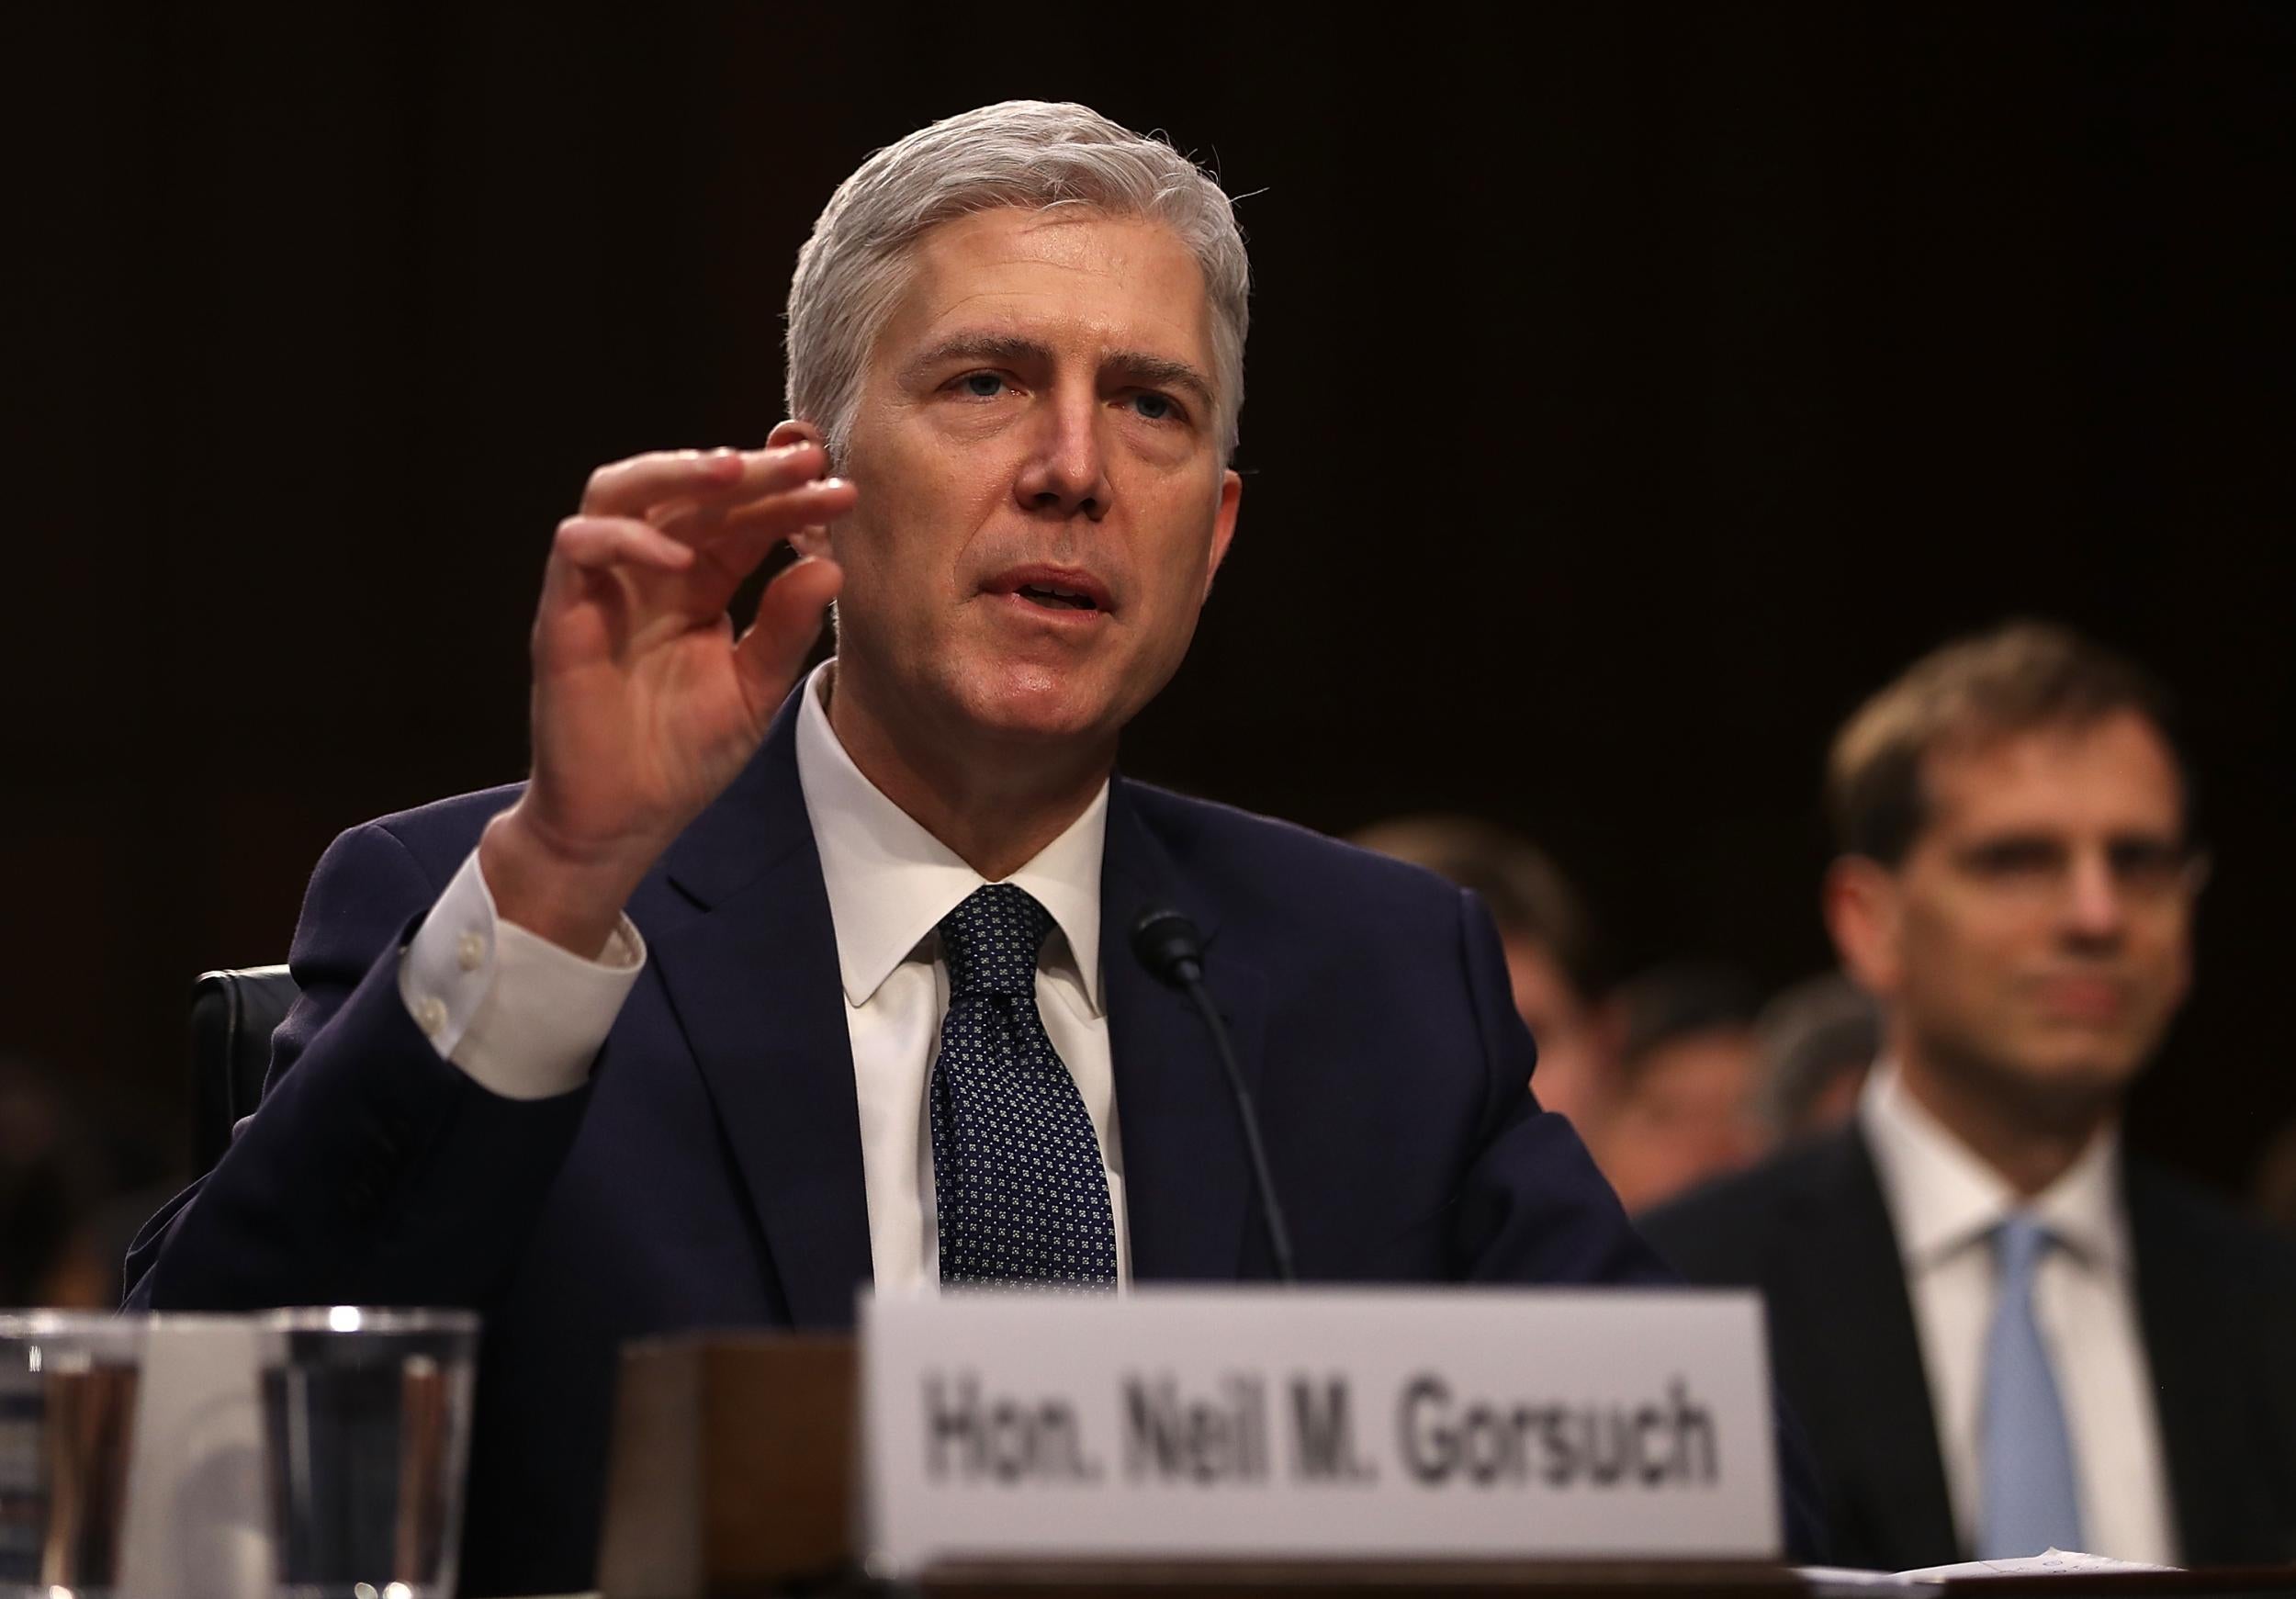 Neil Gorsuch, Trump’s appointee to the court, sided with the four liberal justices on the issue